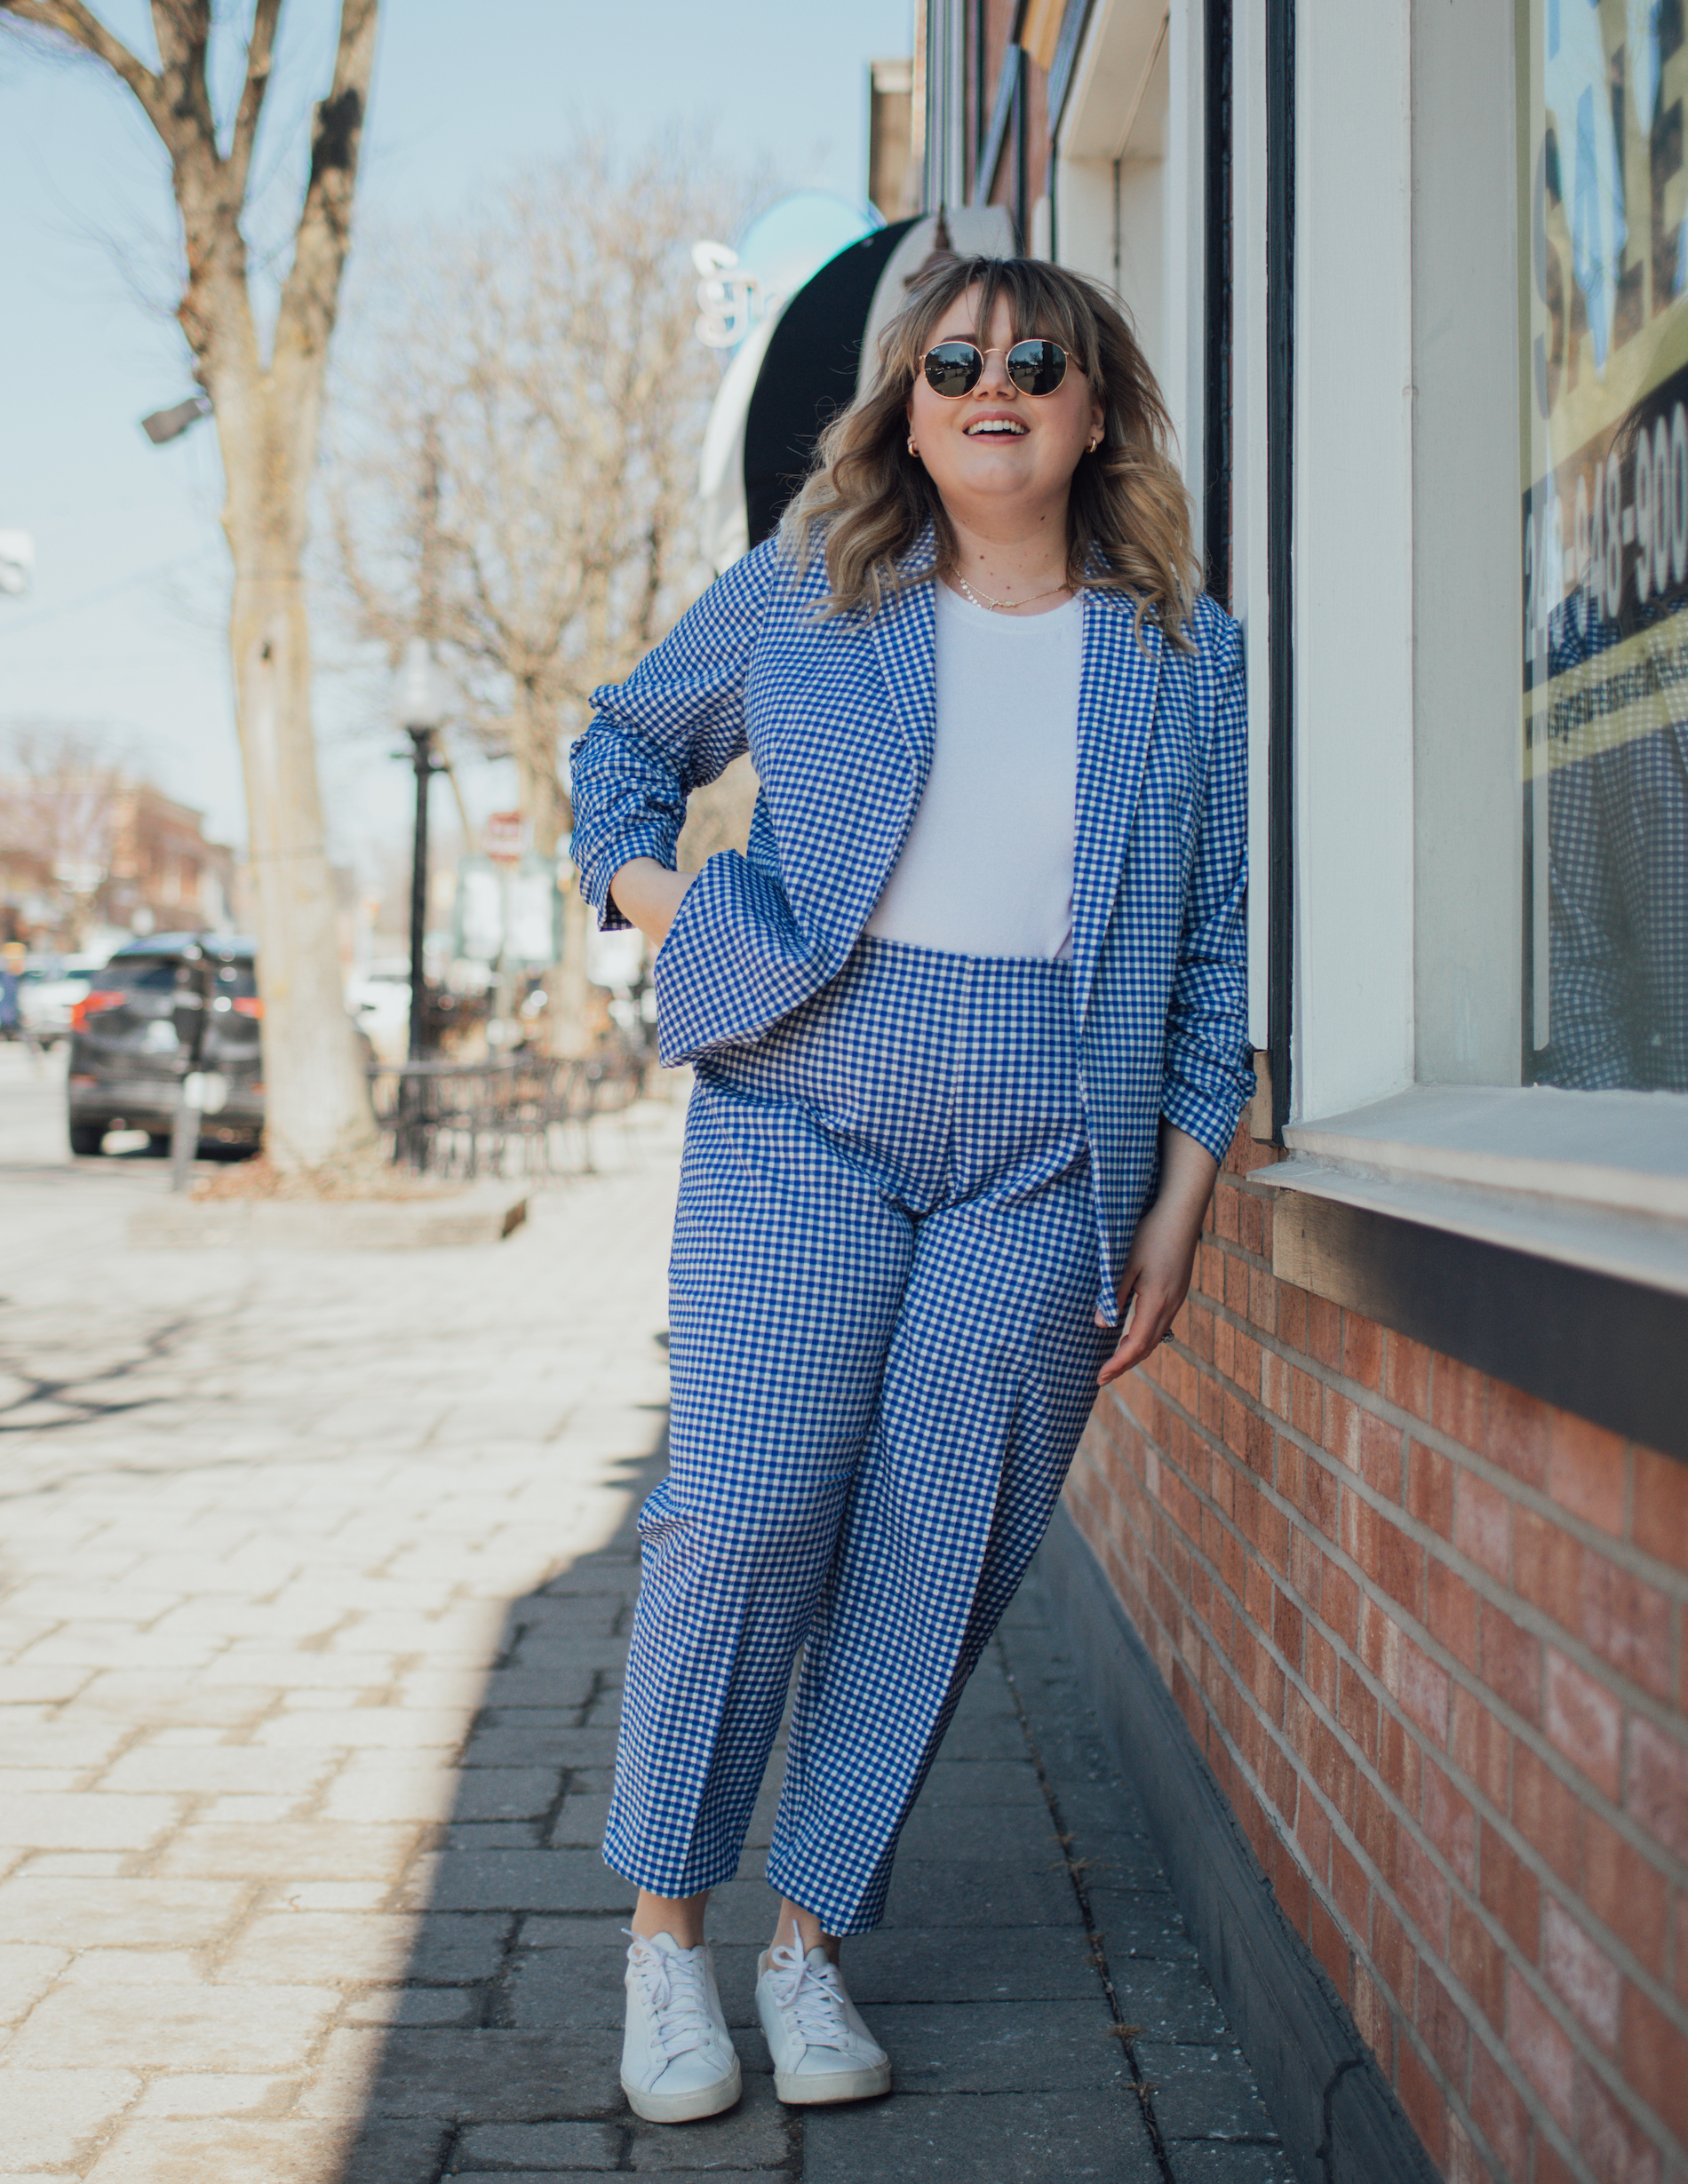 Gingham Suit For Spring. Sharing a fabulous spring ready look from Cato! Wear this chic suit out for everything from coffee to the office.  